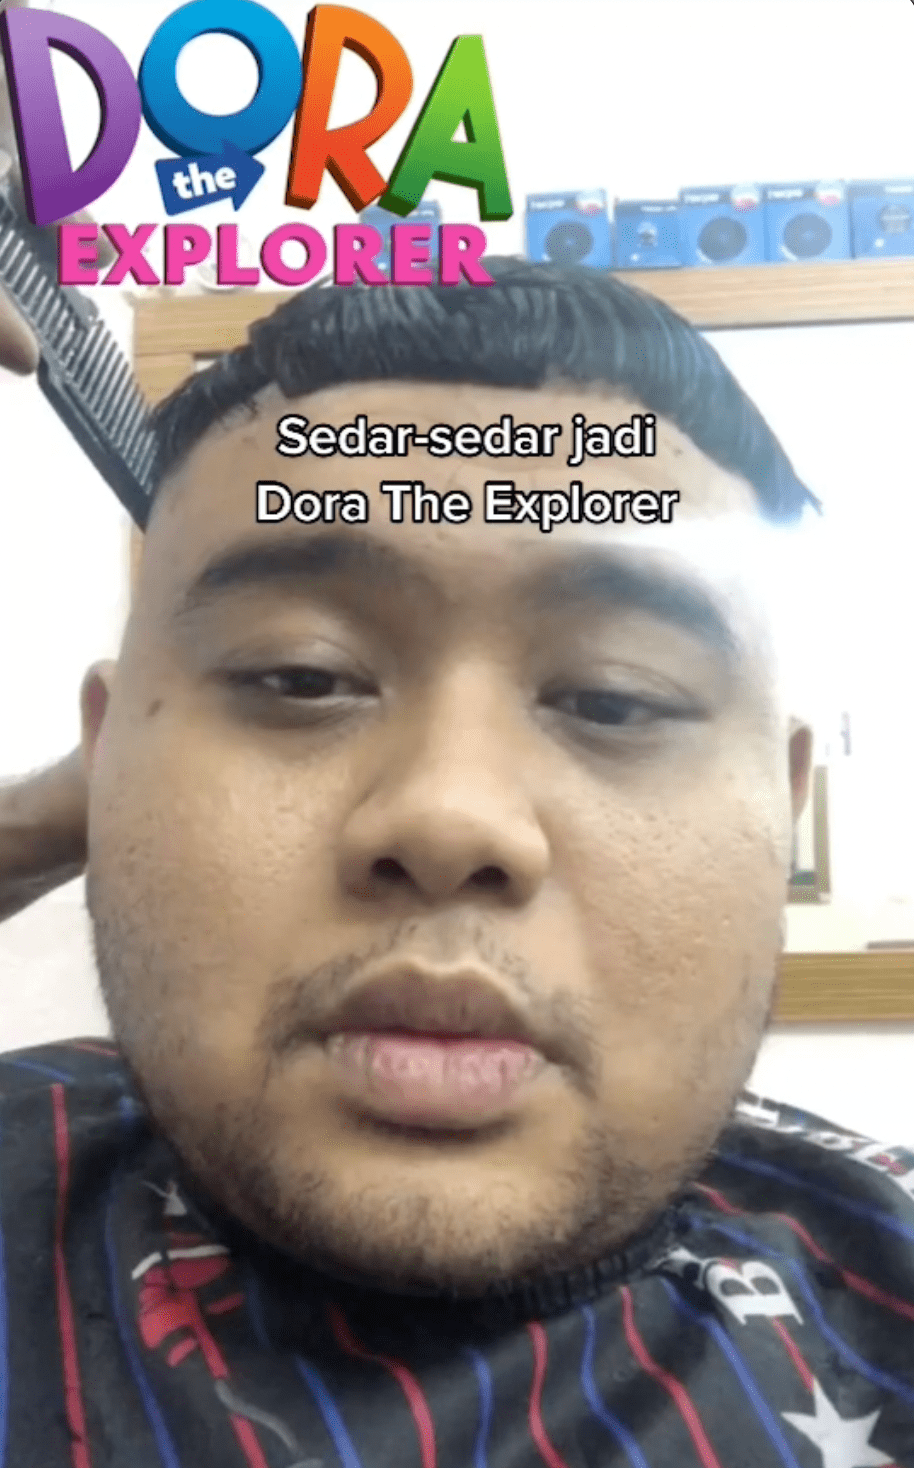 Malaysian kim jung un cuts his hair before interview 5. Png